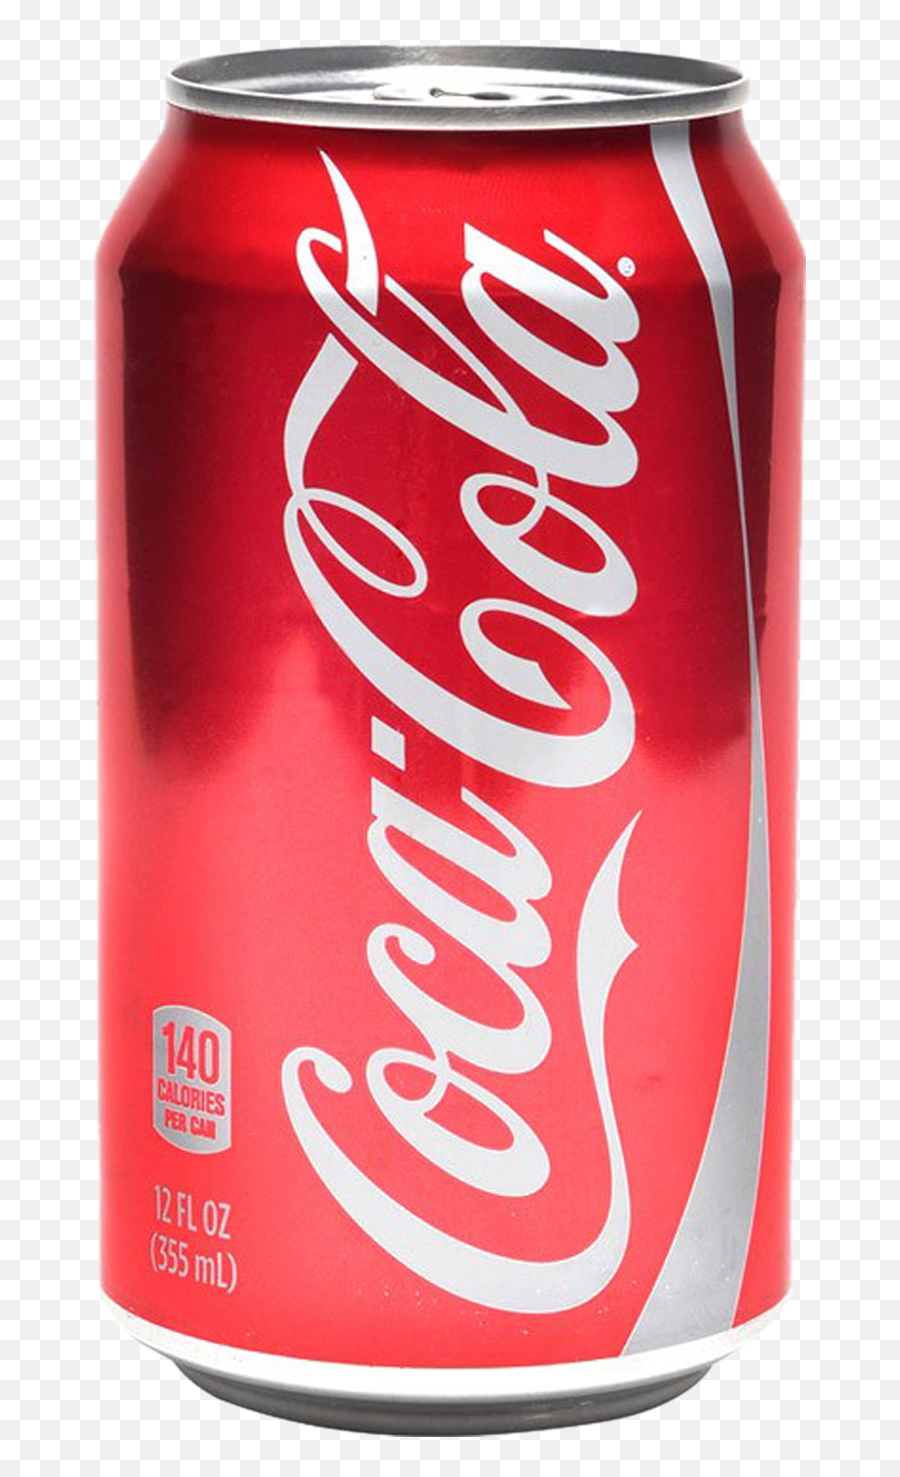 Coca Cola Can Png Images Collection For Free Download Coke Bottle